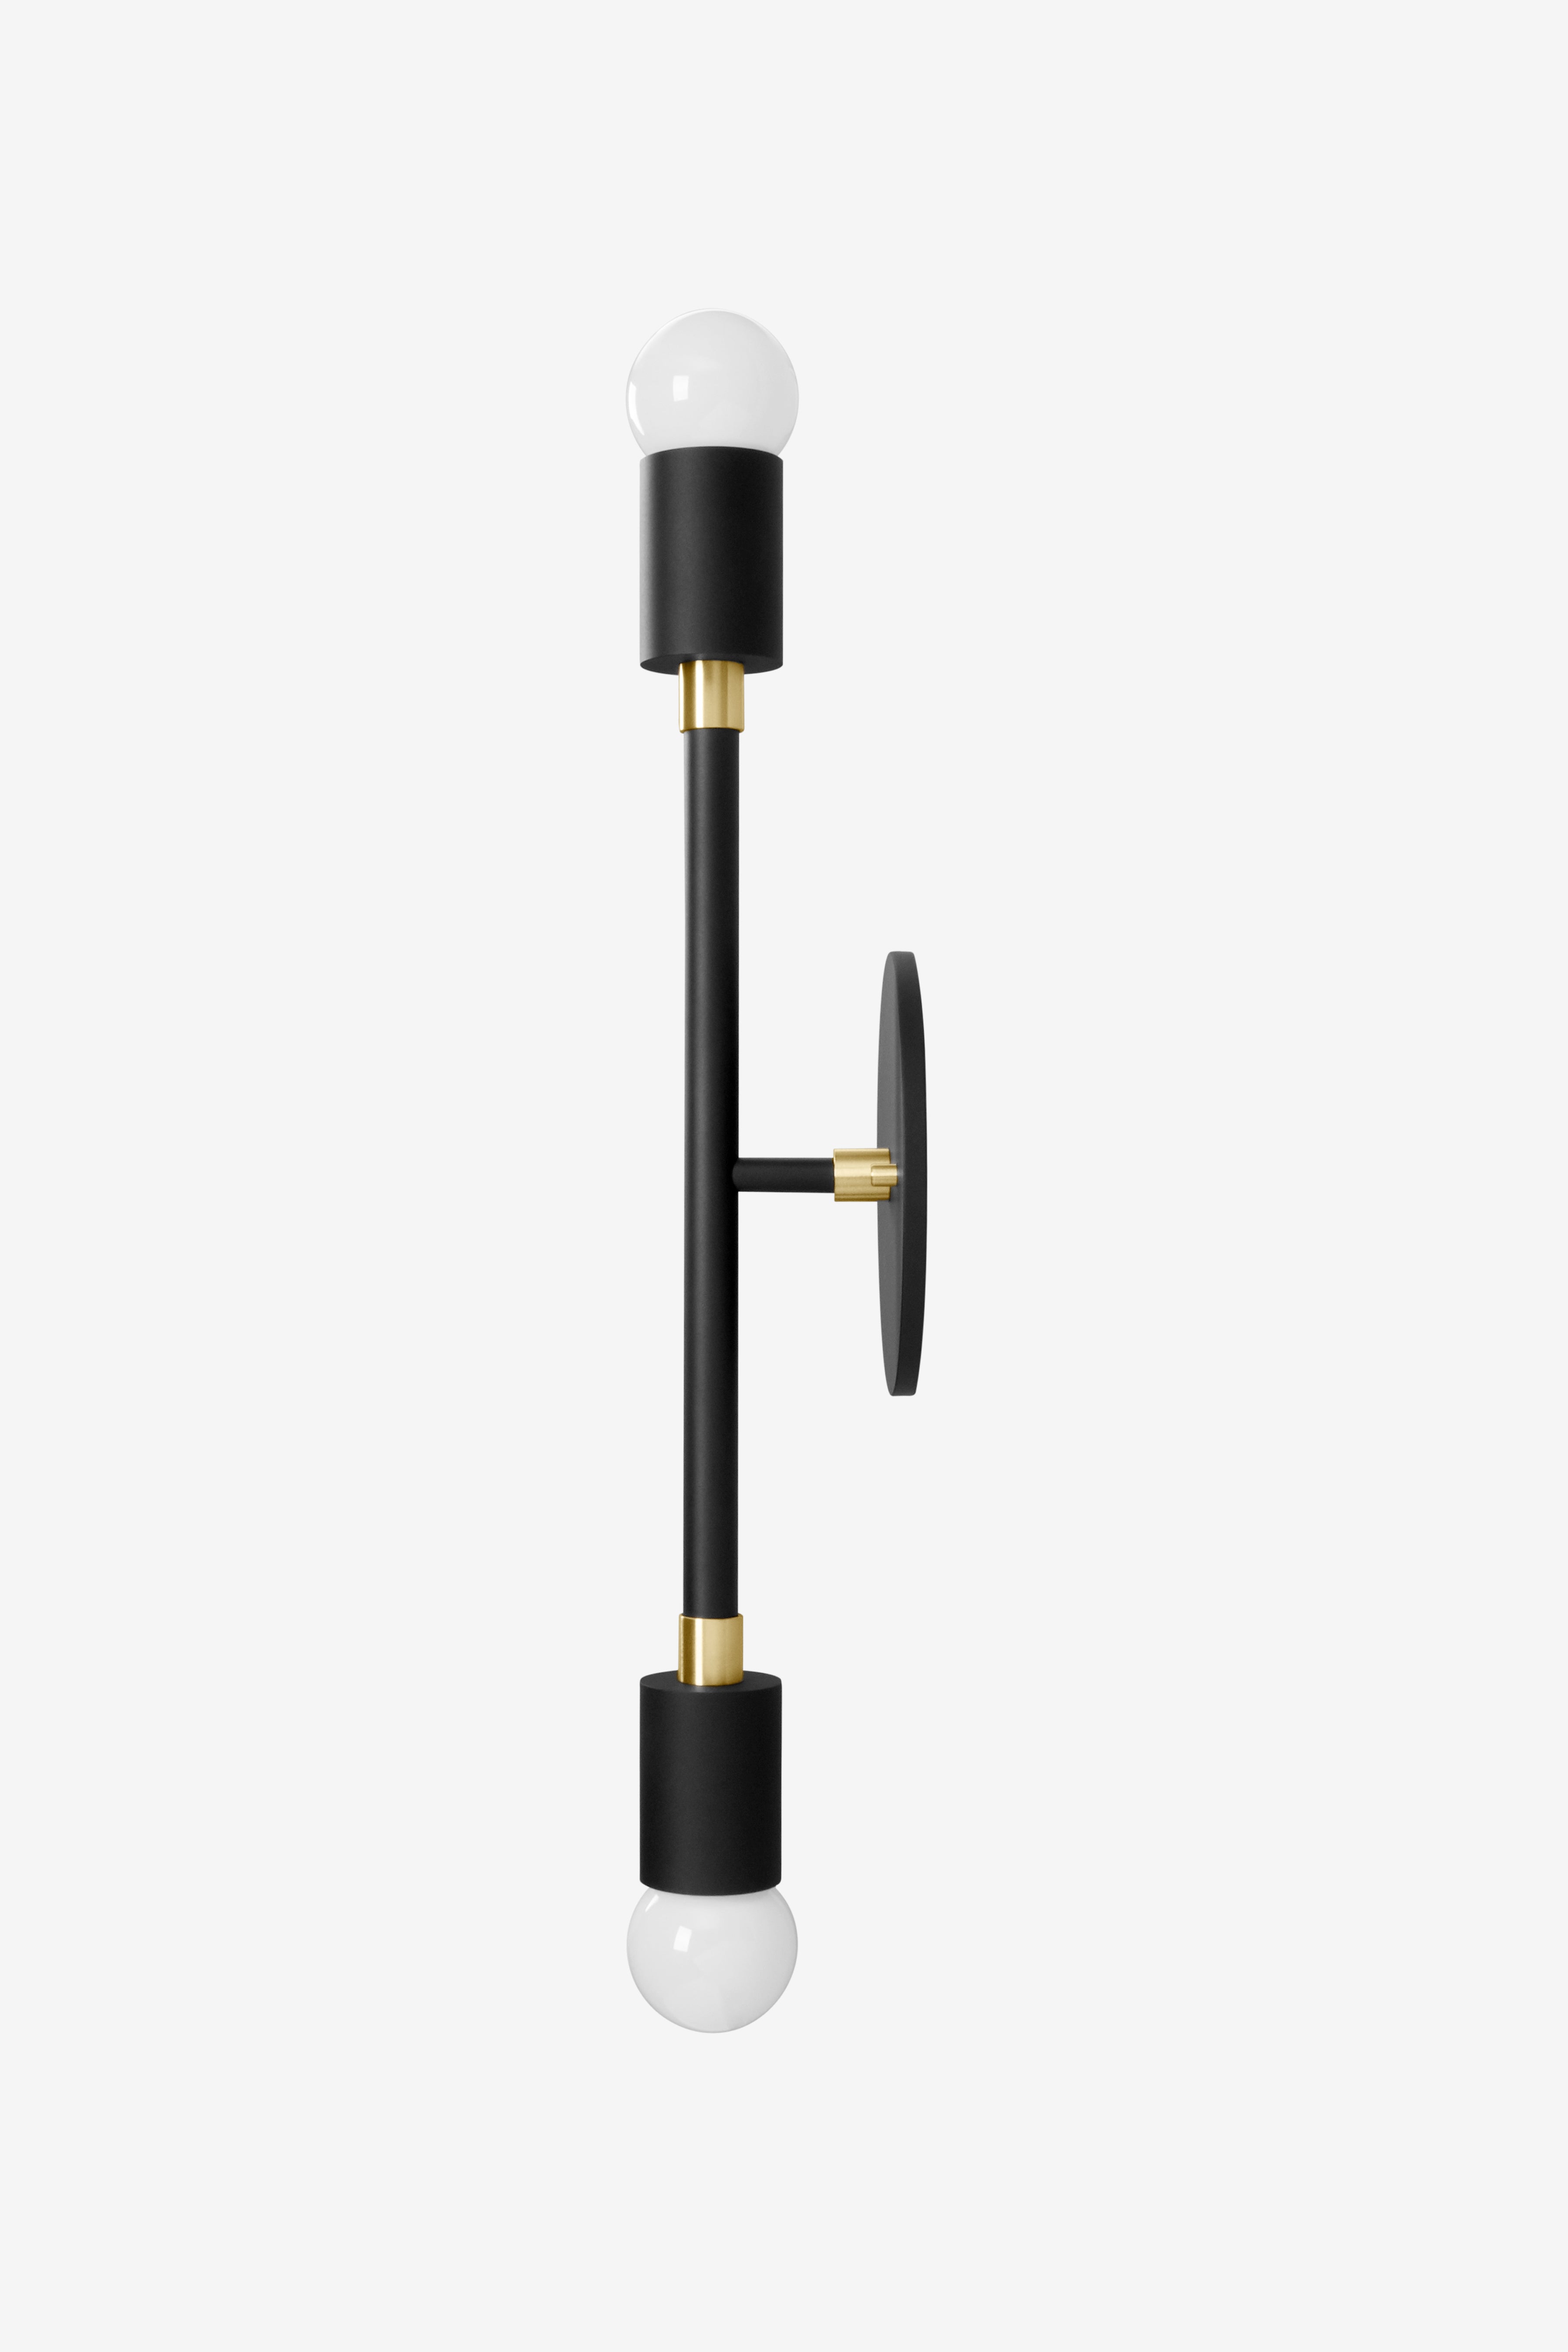 Sausalito Small / Sconce / Black and Brass